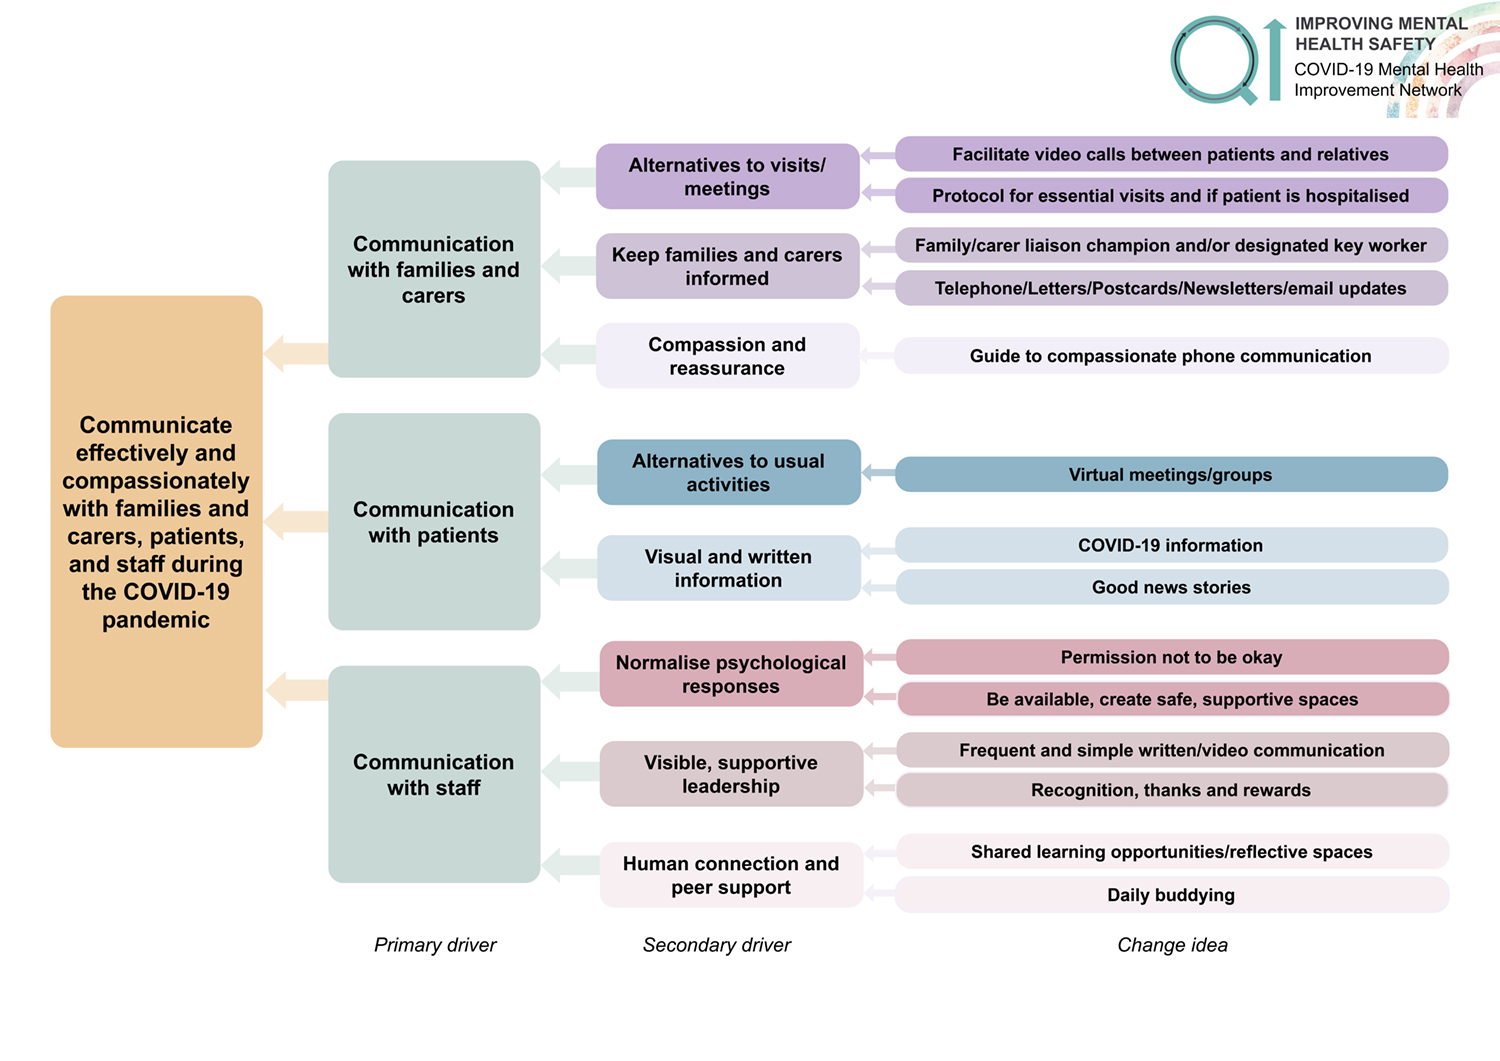 Driver diagram for improving communication with families and carers, patients, and staff during COVID-19